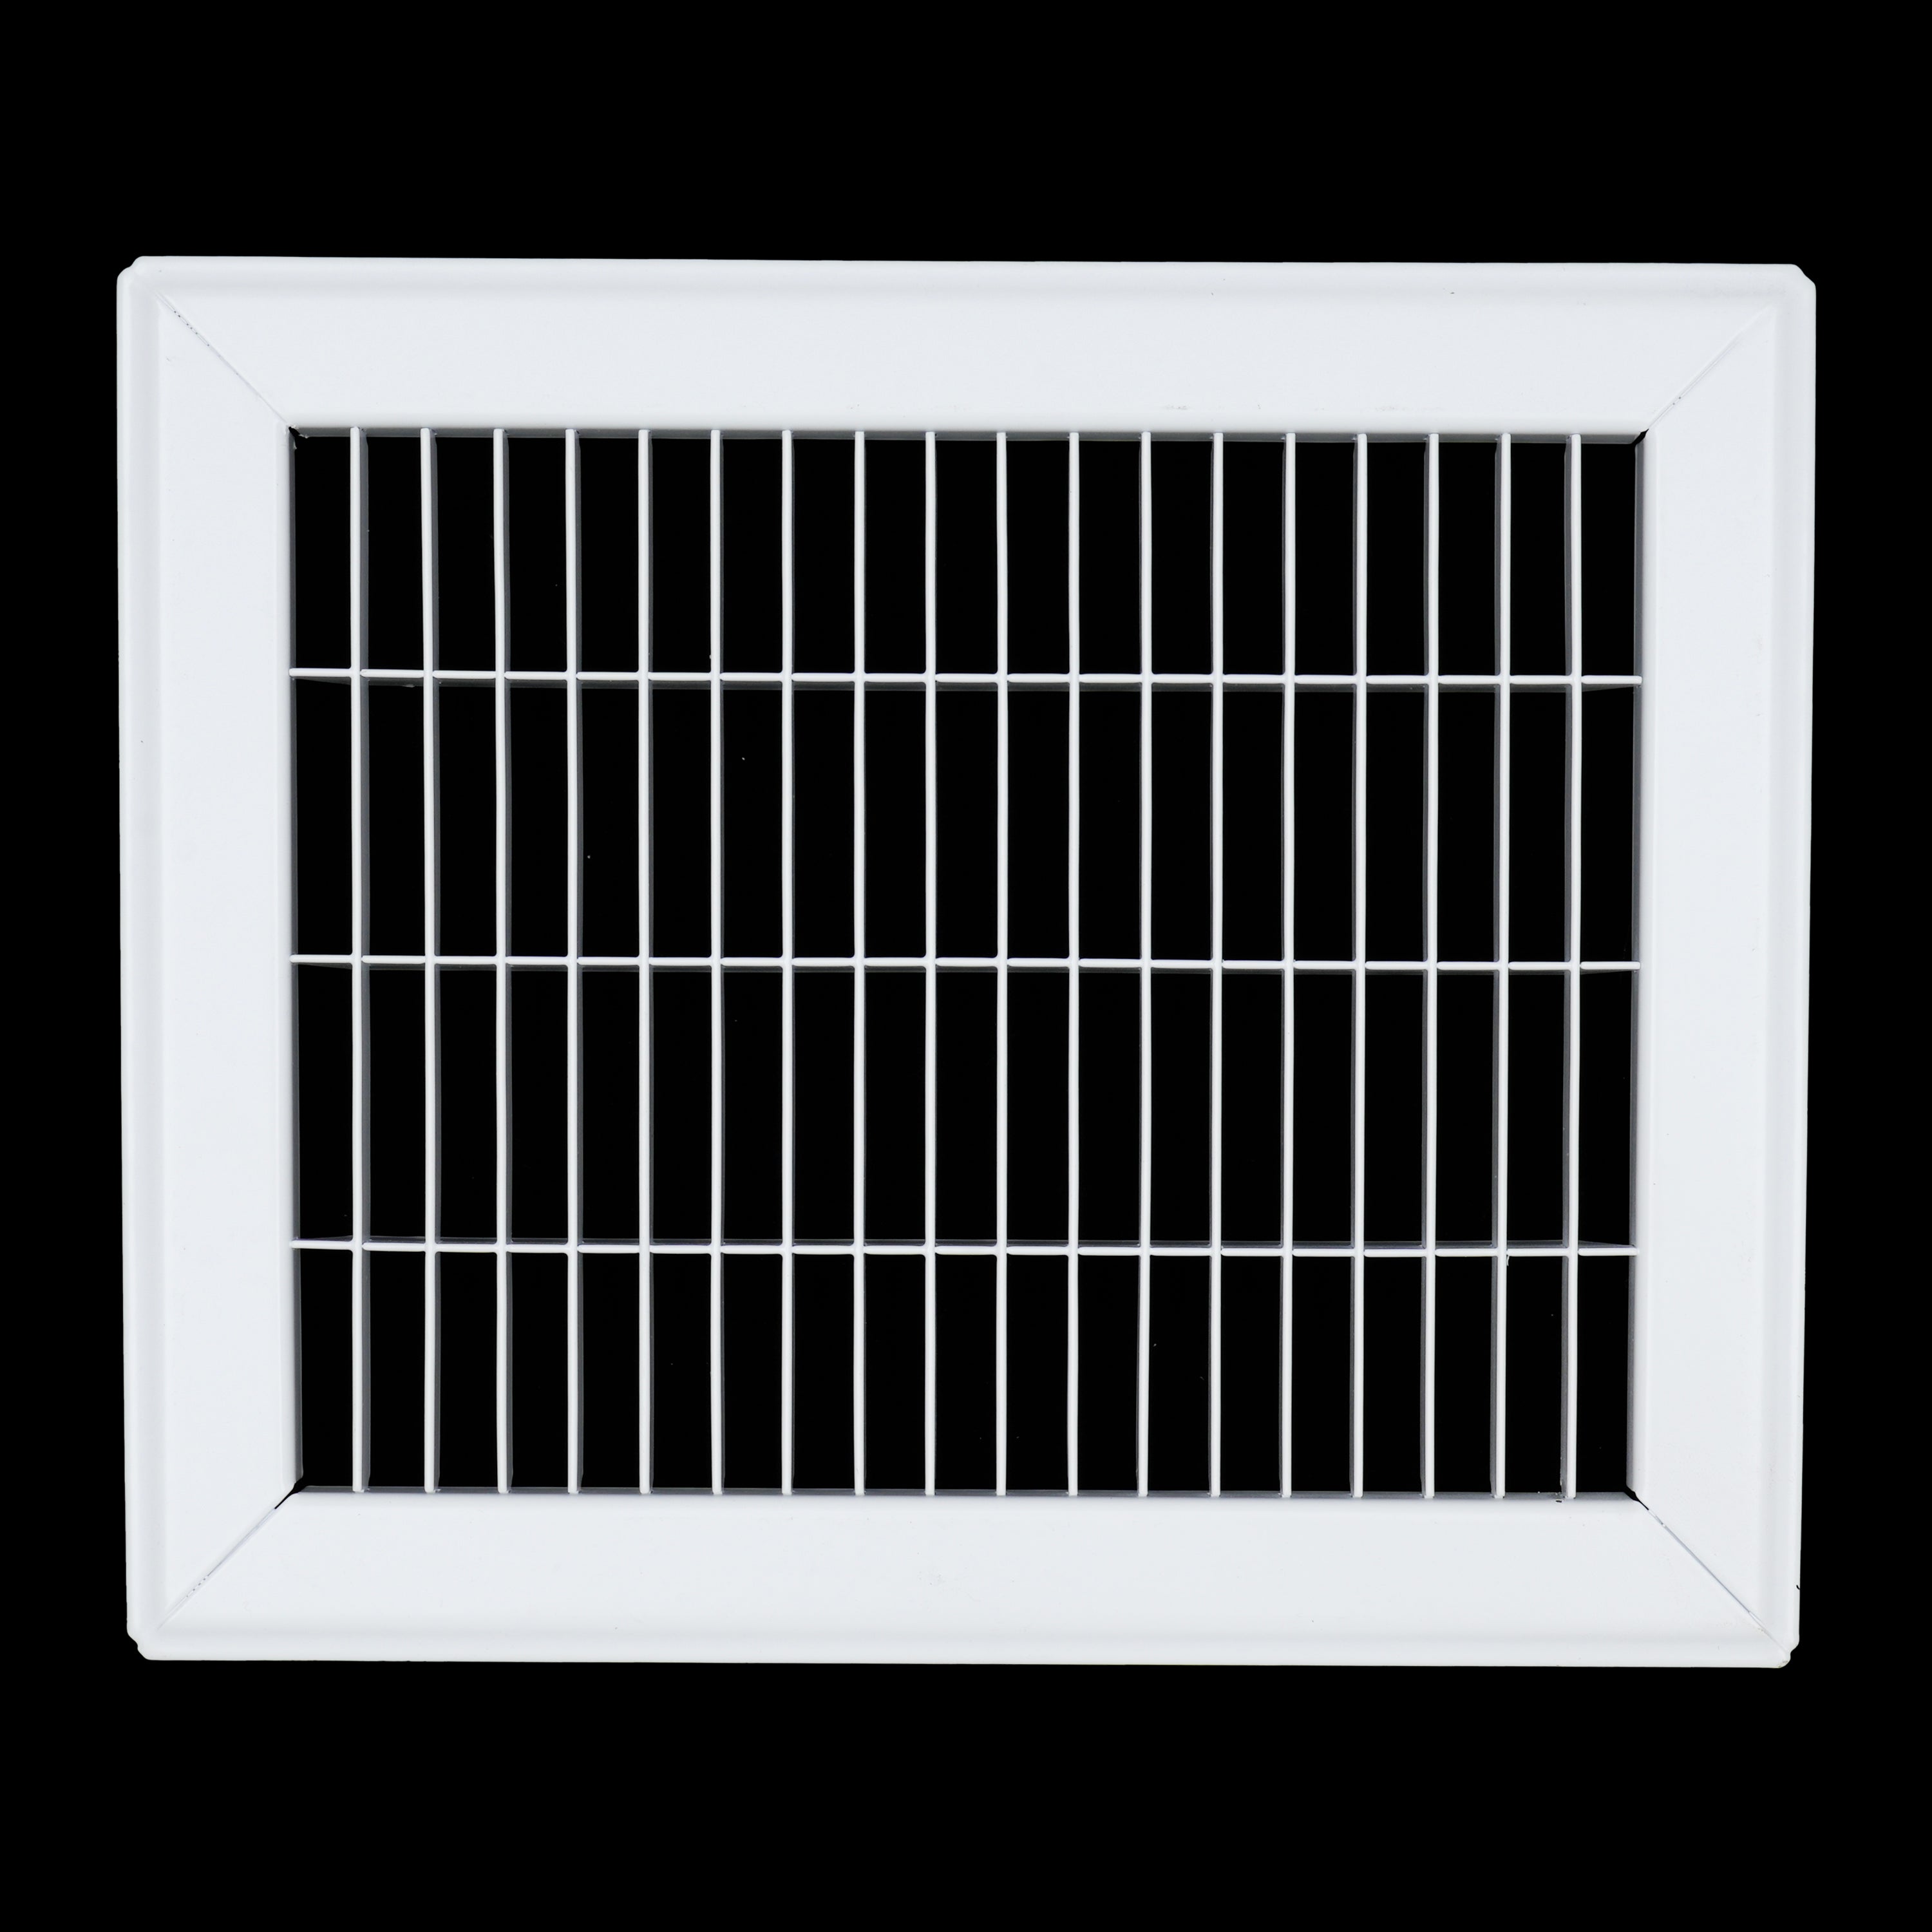 8"W x 10"H [Duct Opening] Return Air Floor Grille | Vent Cover Grill for Floor - White| Outer Dimensions: 9.75"W X 11.75"H